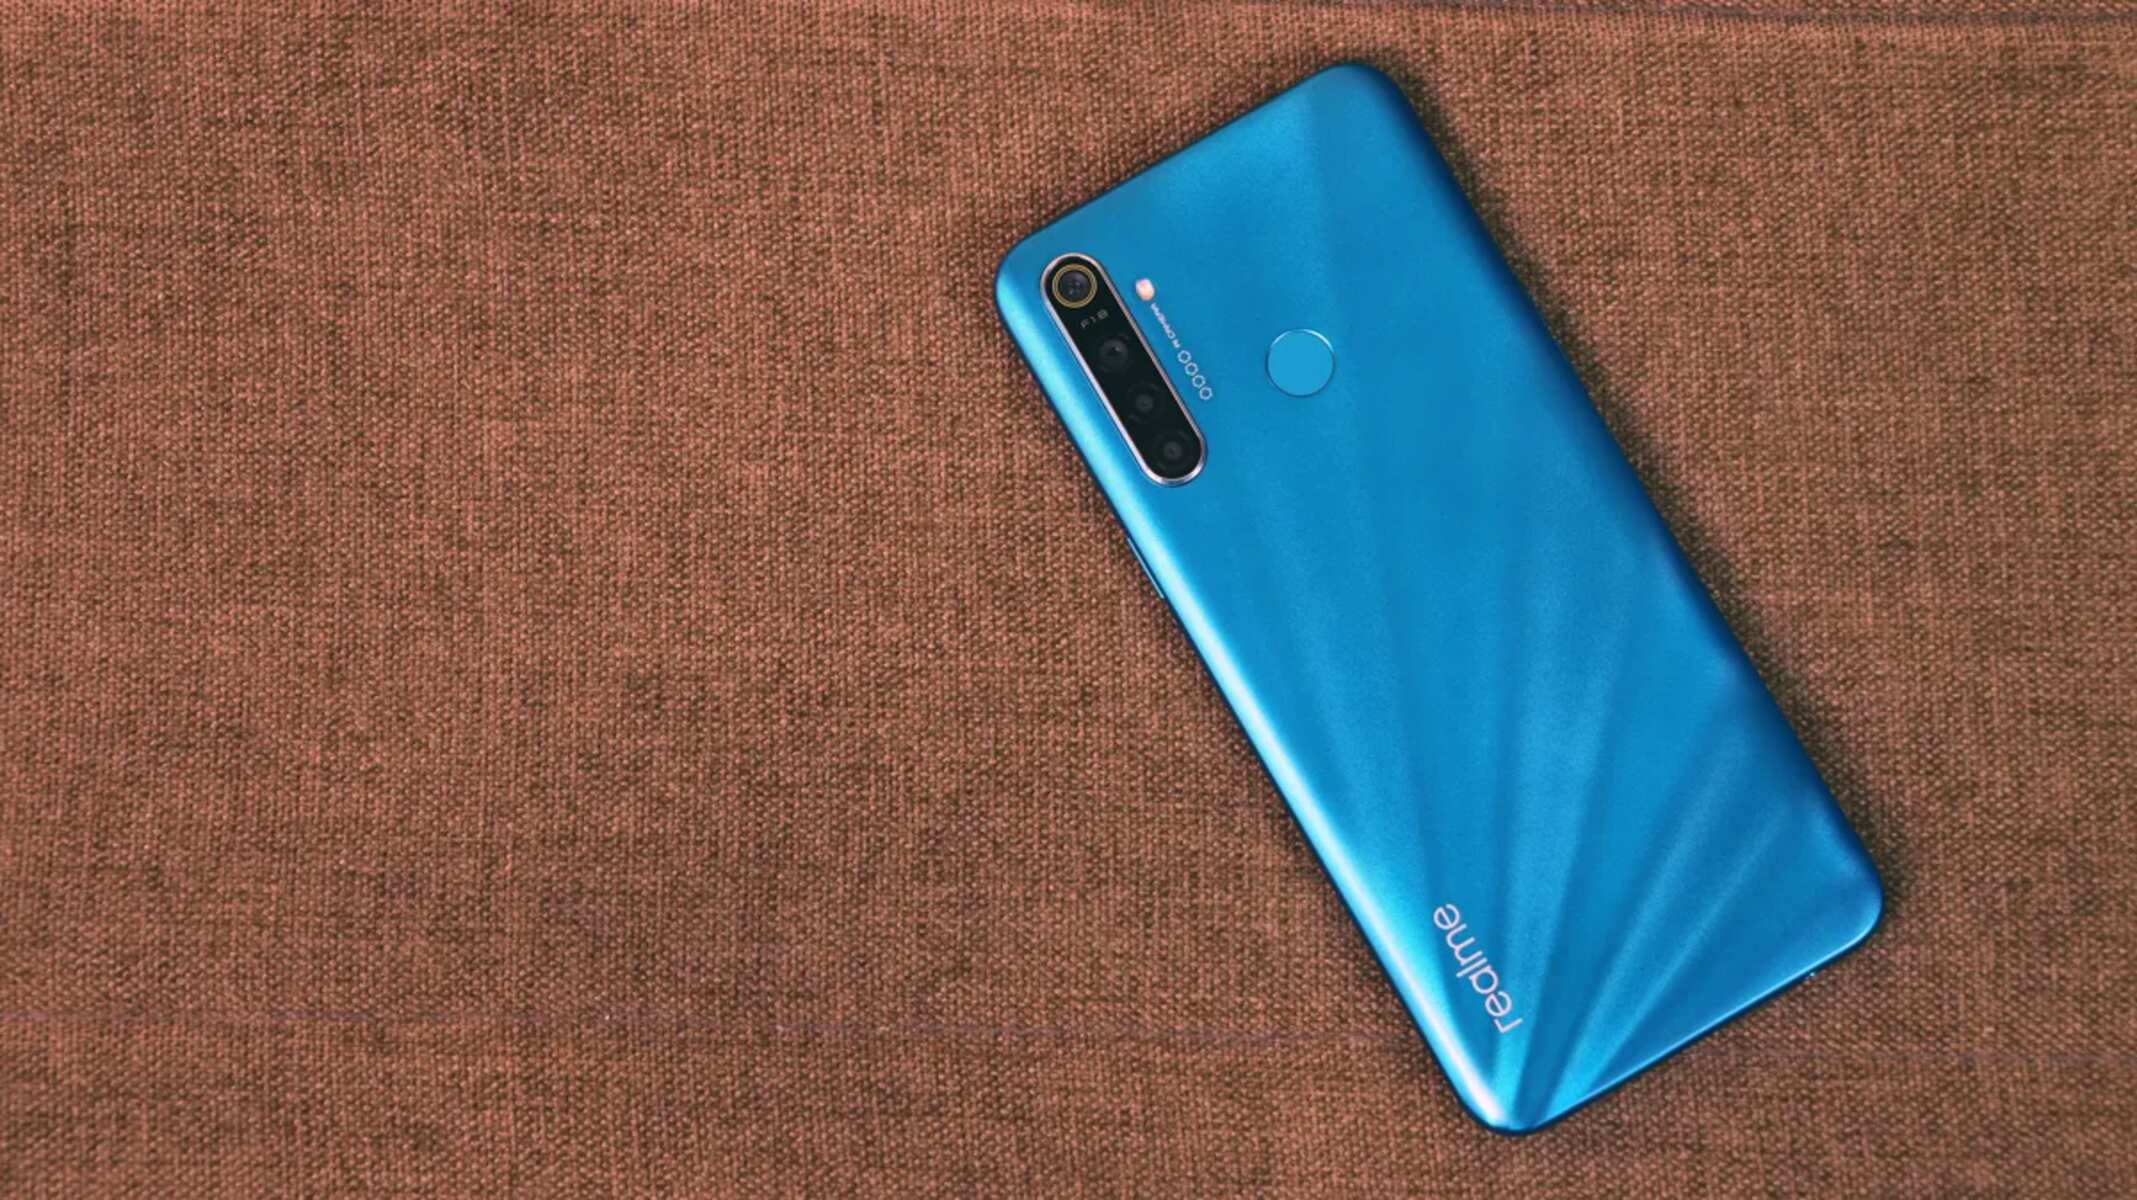 Rooting Realme 5: Enhancing Your Device’s Capabilities